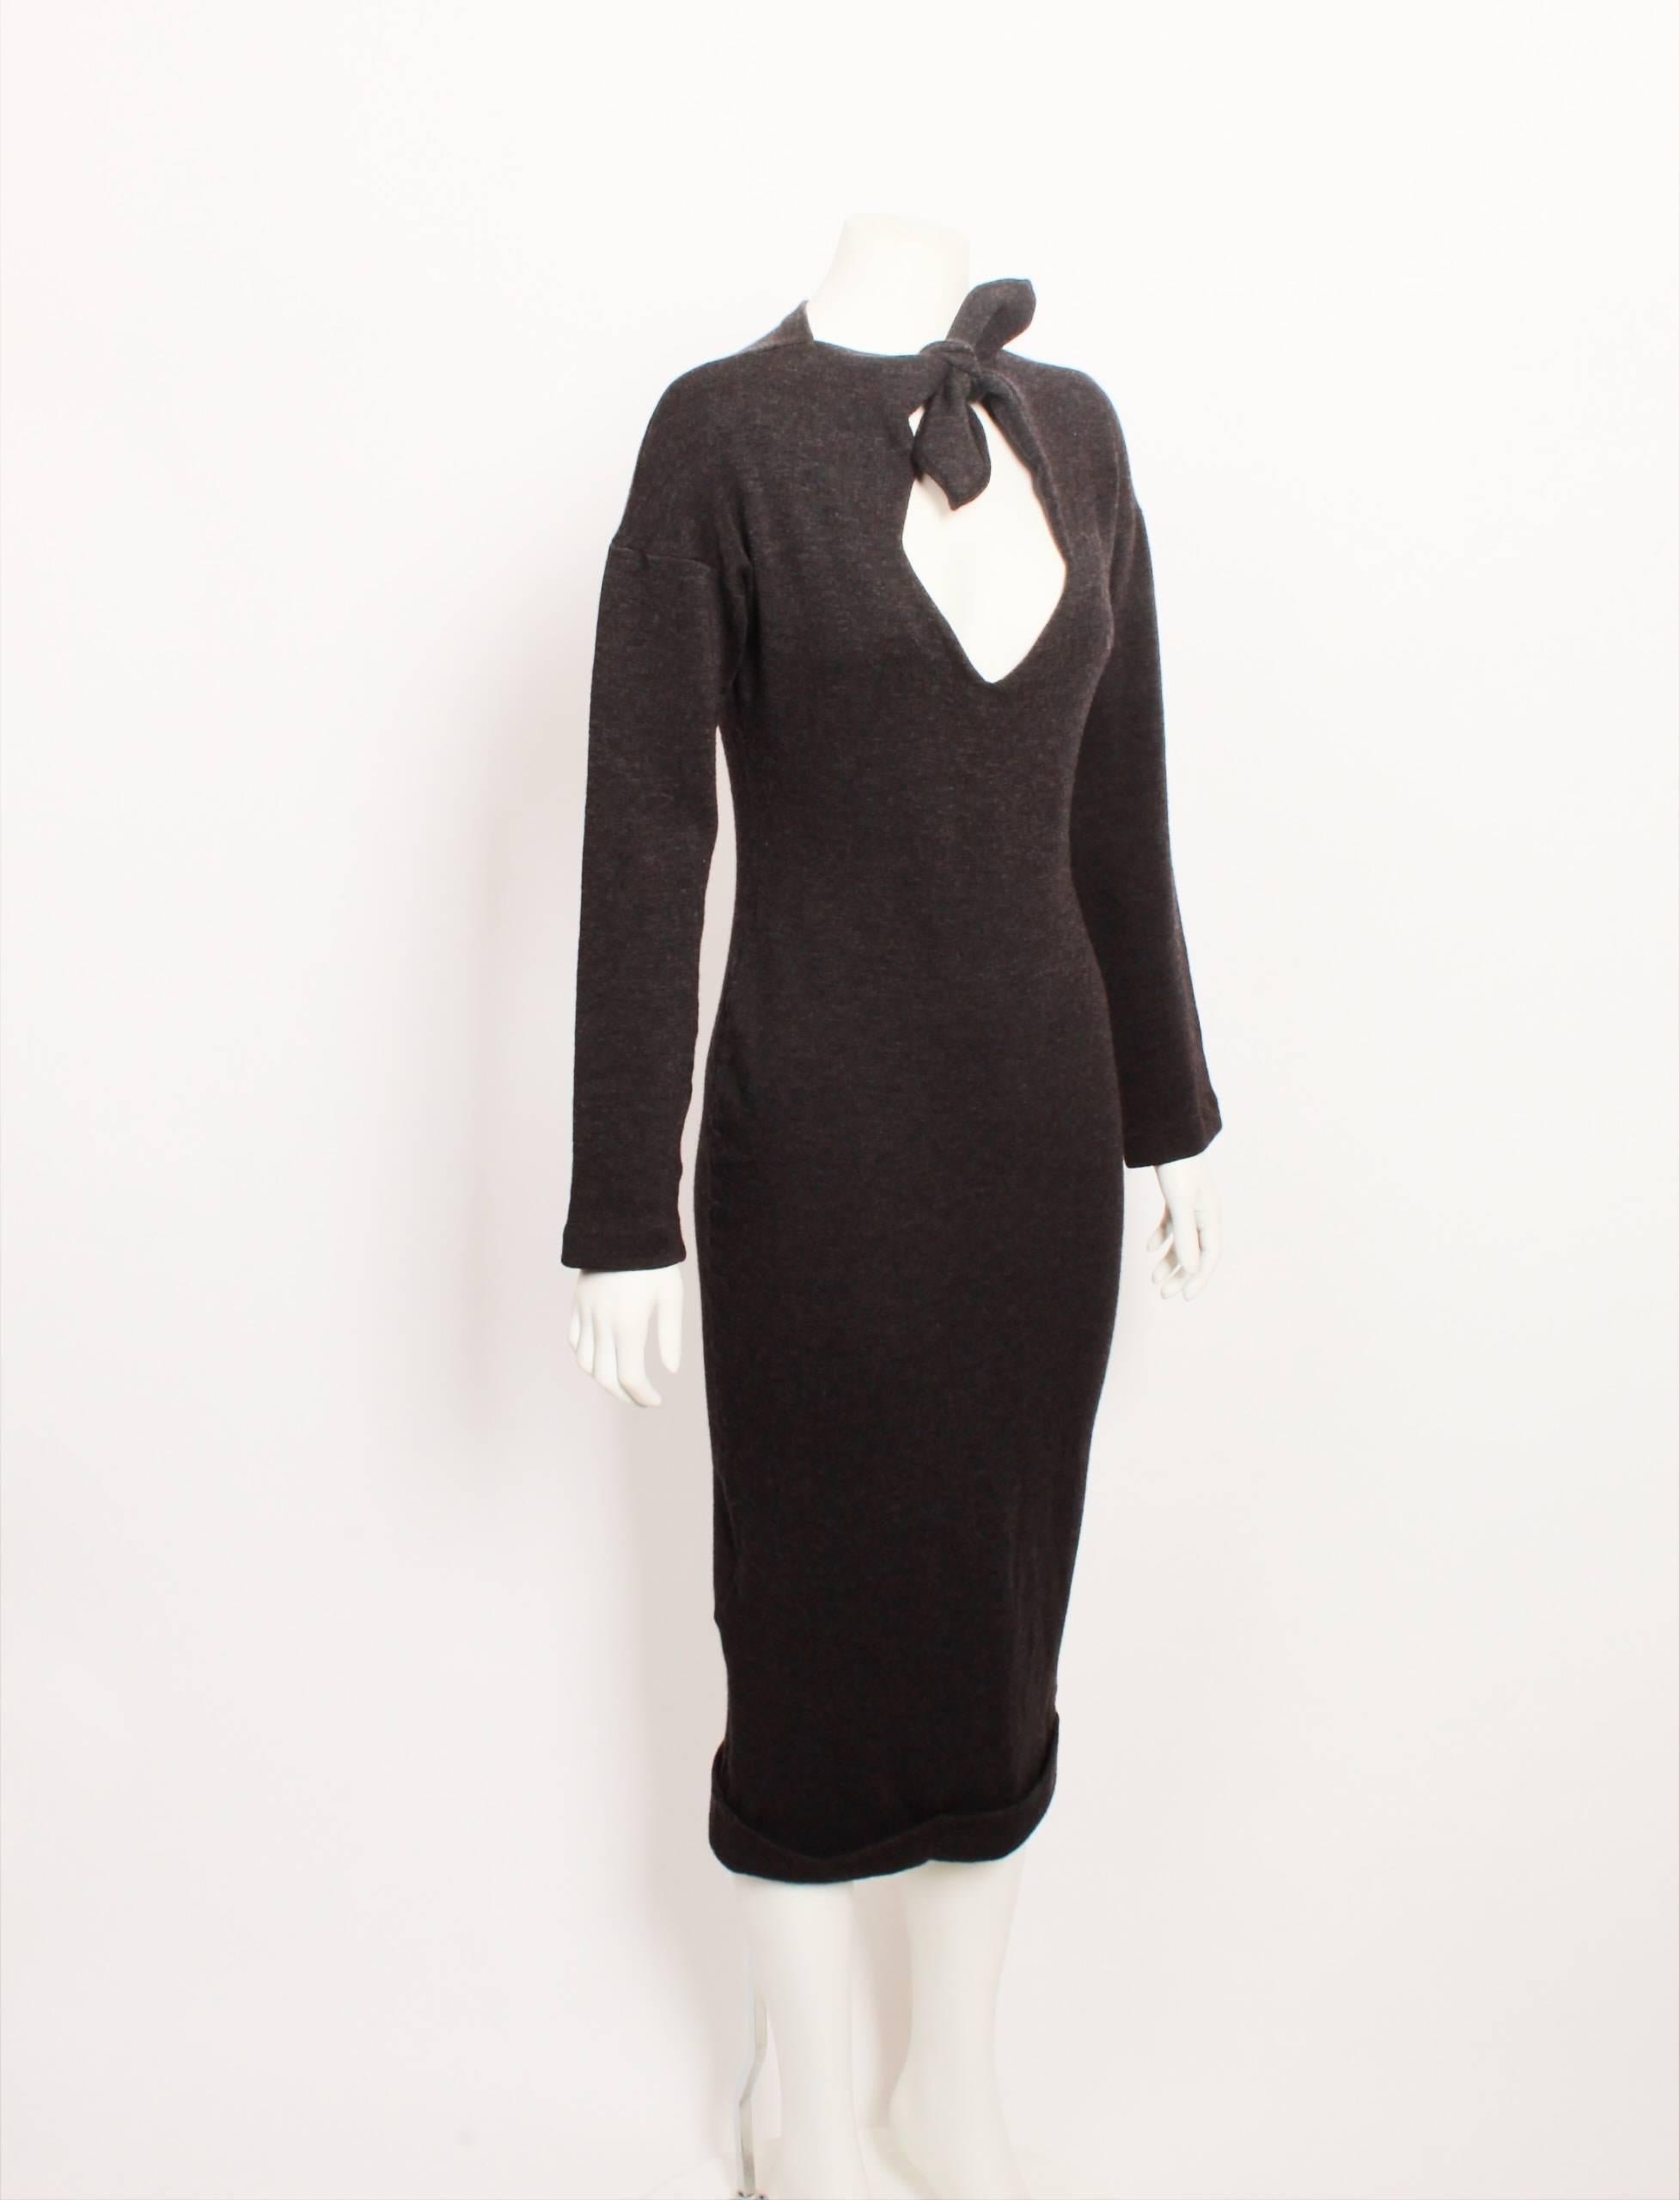 This Romeo Gigli charcoal grey long sleeve body con fitted sheath dress is made from thick wool jersey and features a diamond shaped key hole with petal shaped tie at the front neck. Hem has a cuff turned up finish. Measurements are taken with